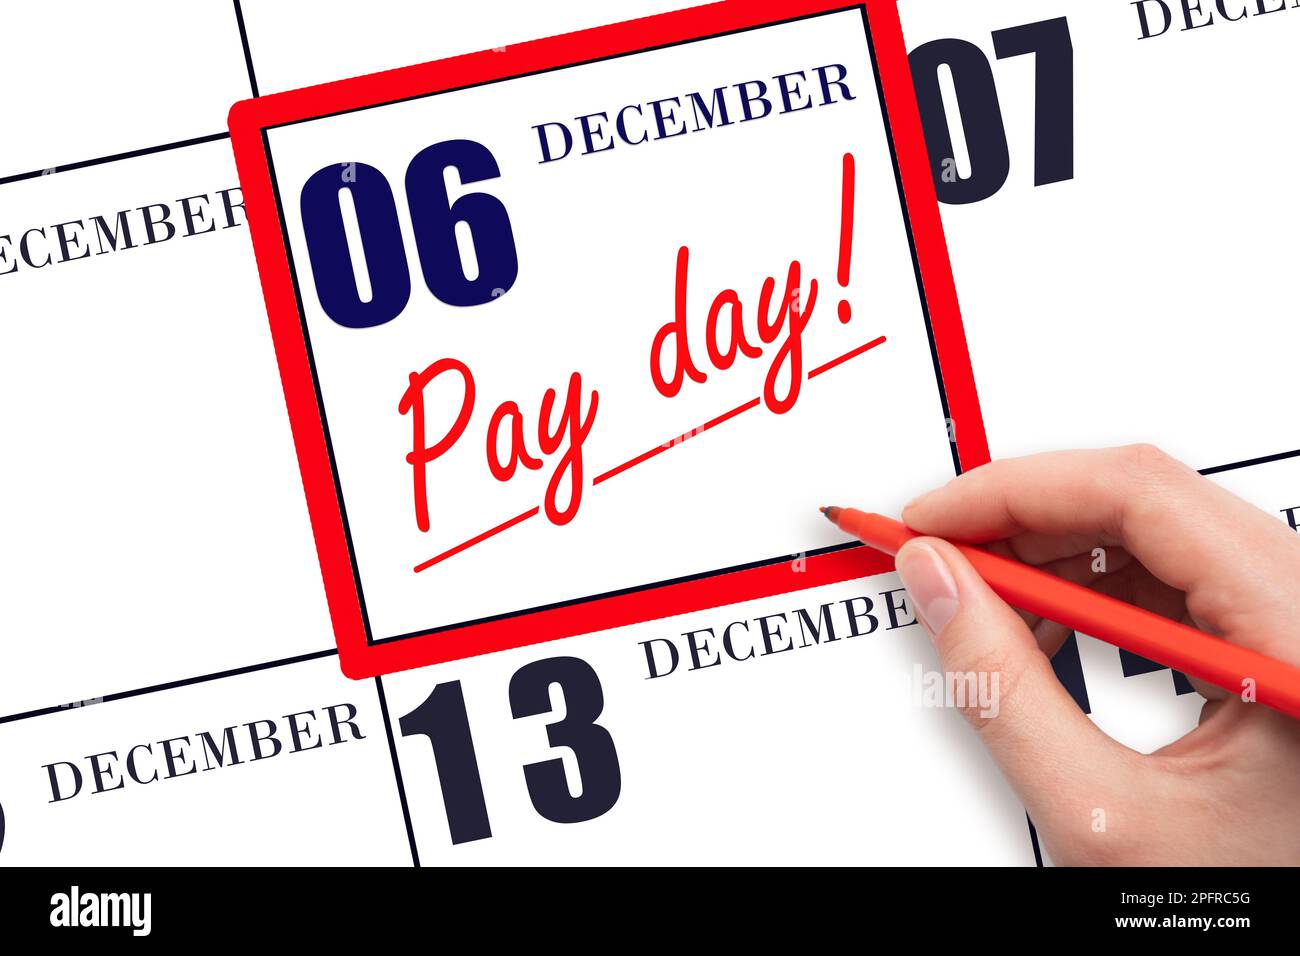 6th day of December. Hand writing text PAY DATE on calendar date December 6 and underline it. Payment due date.  Reminder concept of payment. Winter m Stock Photo